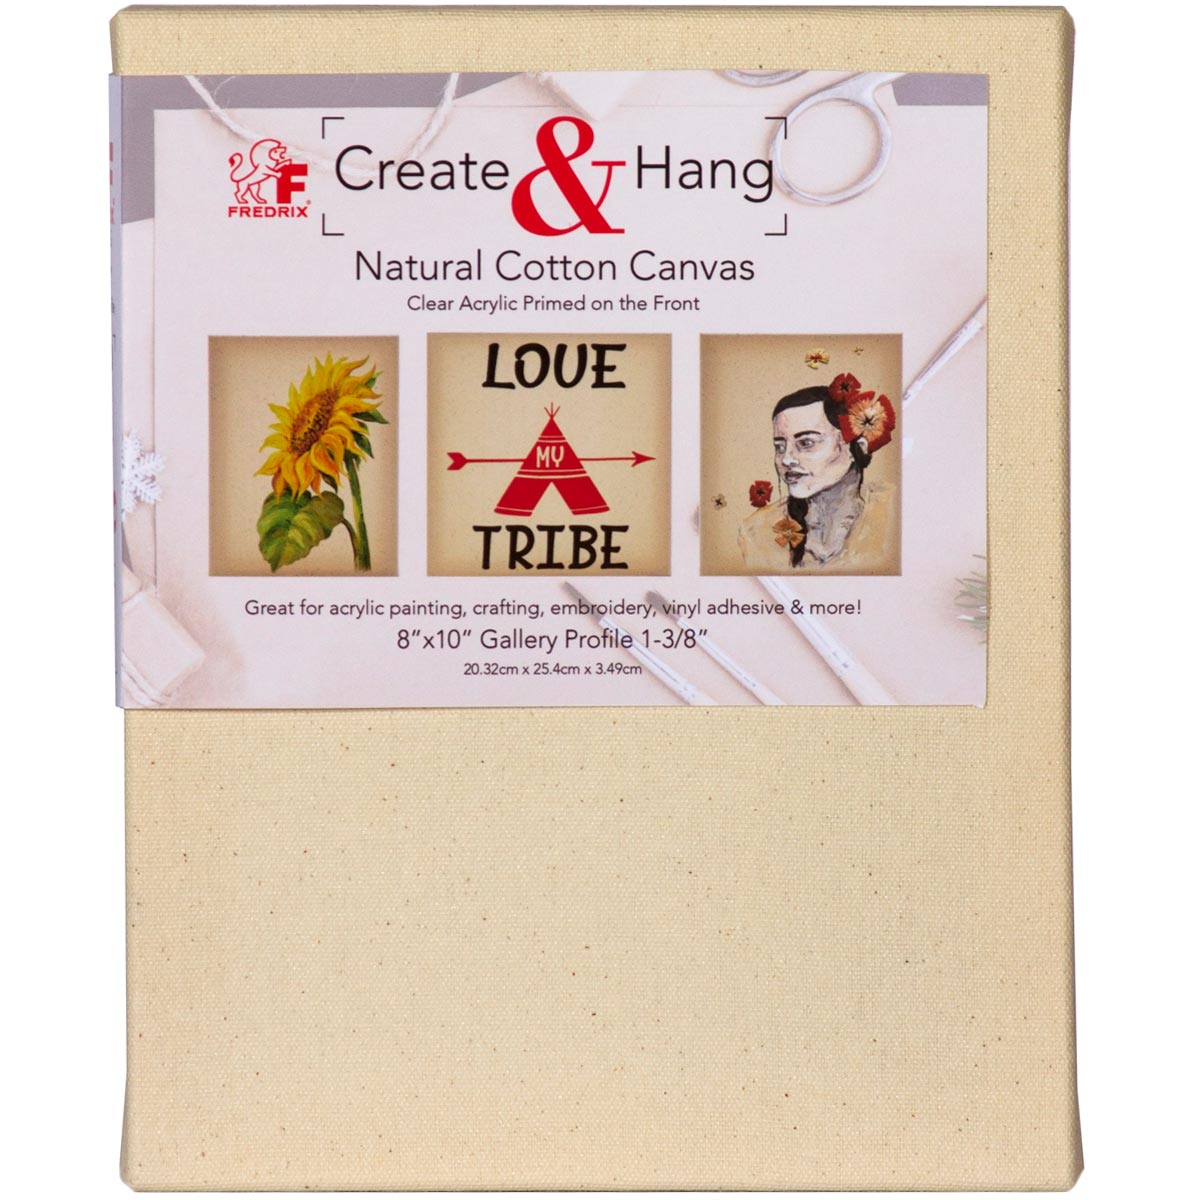 Create & Hang Natural Cotton Canvas, 8oz Primed 8in x 10in